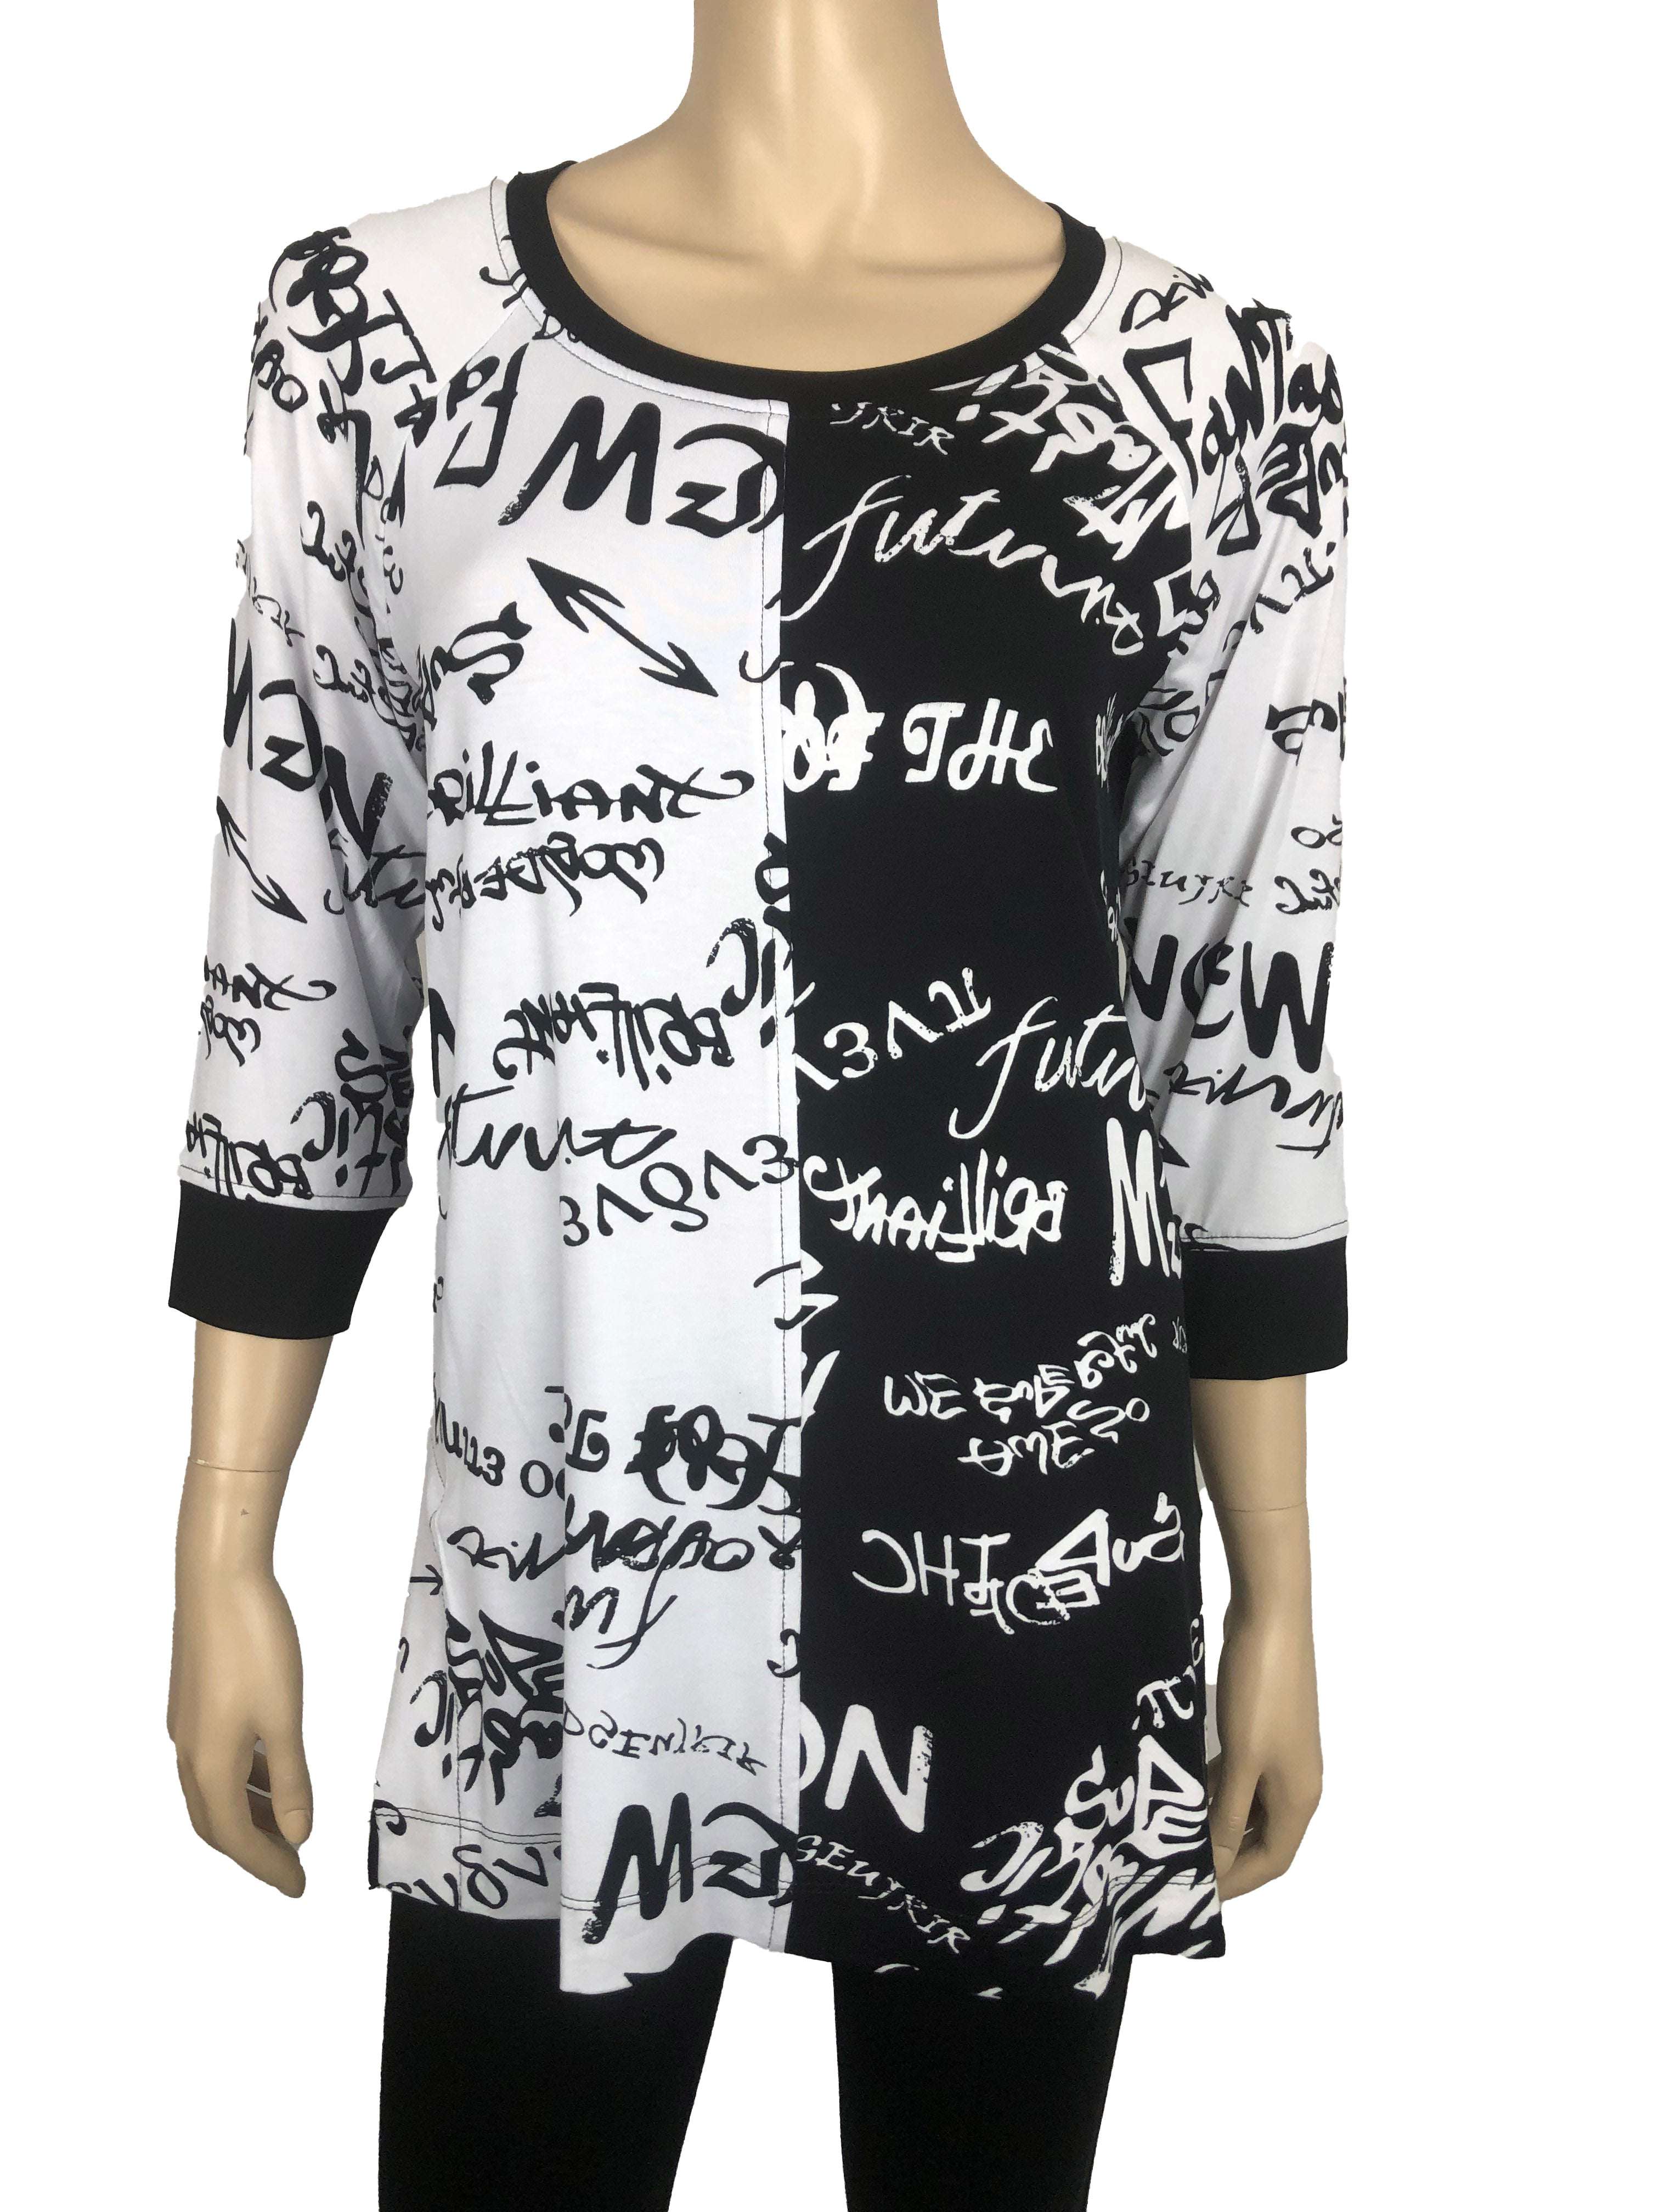 Women's Tops On Sale Canada Black and White Quality Flattering Tunic Top Now 50% Off Made in Canada - Yvonne Marie - Yvonne Marie